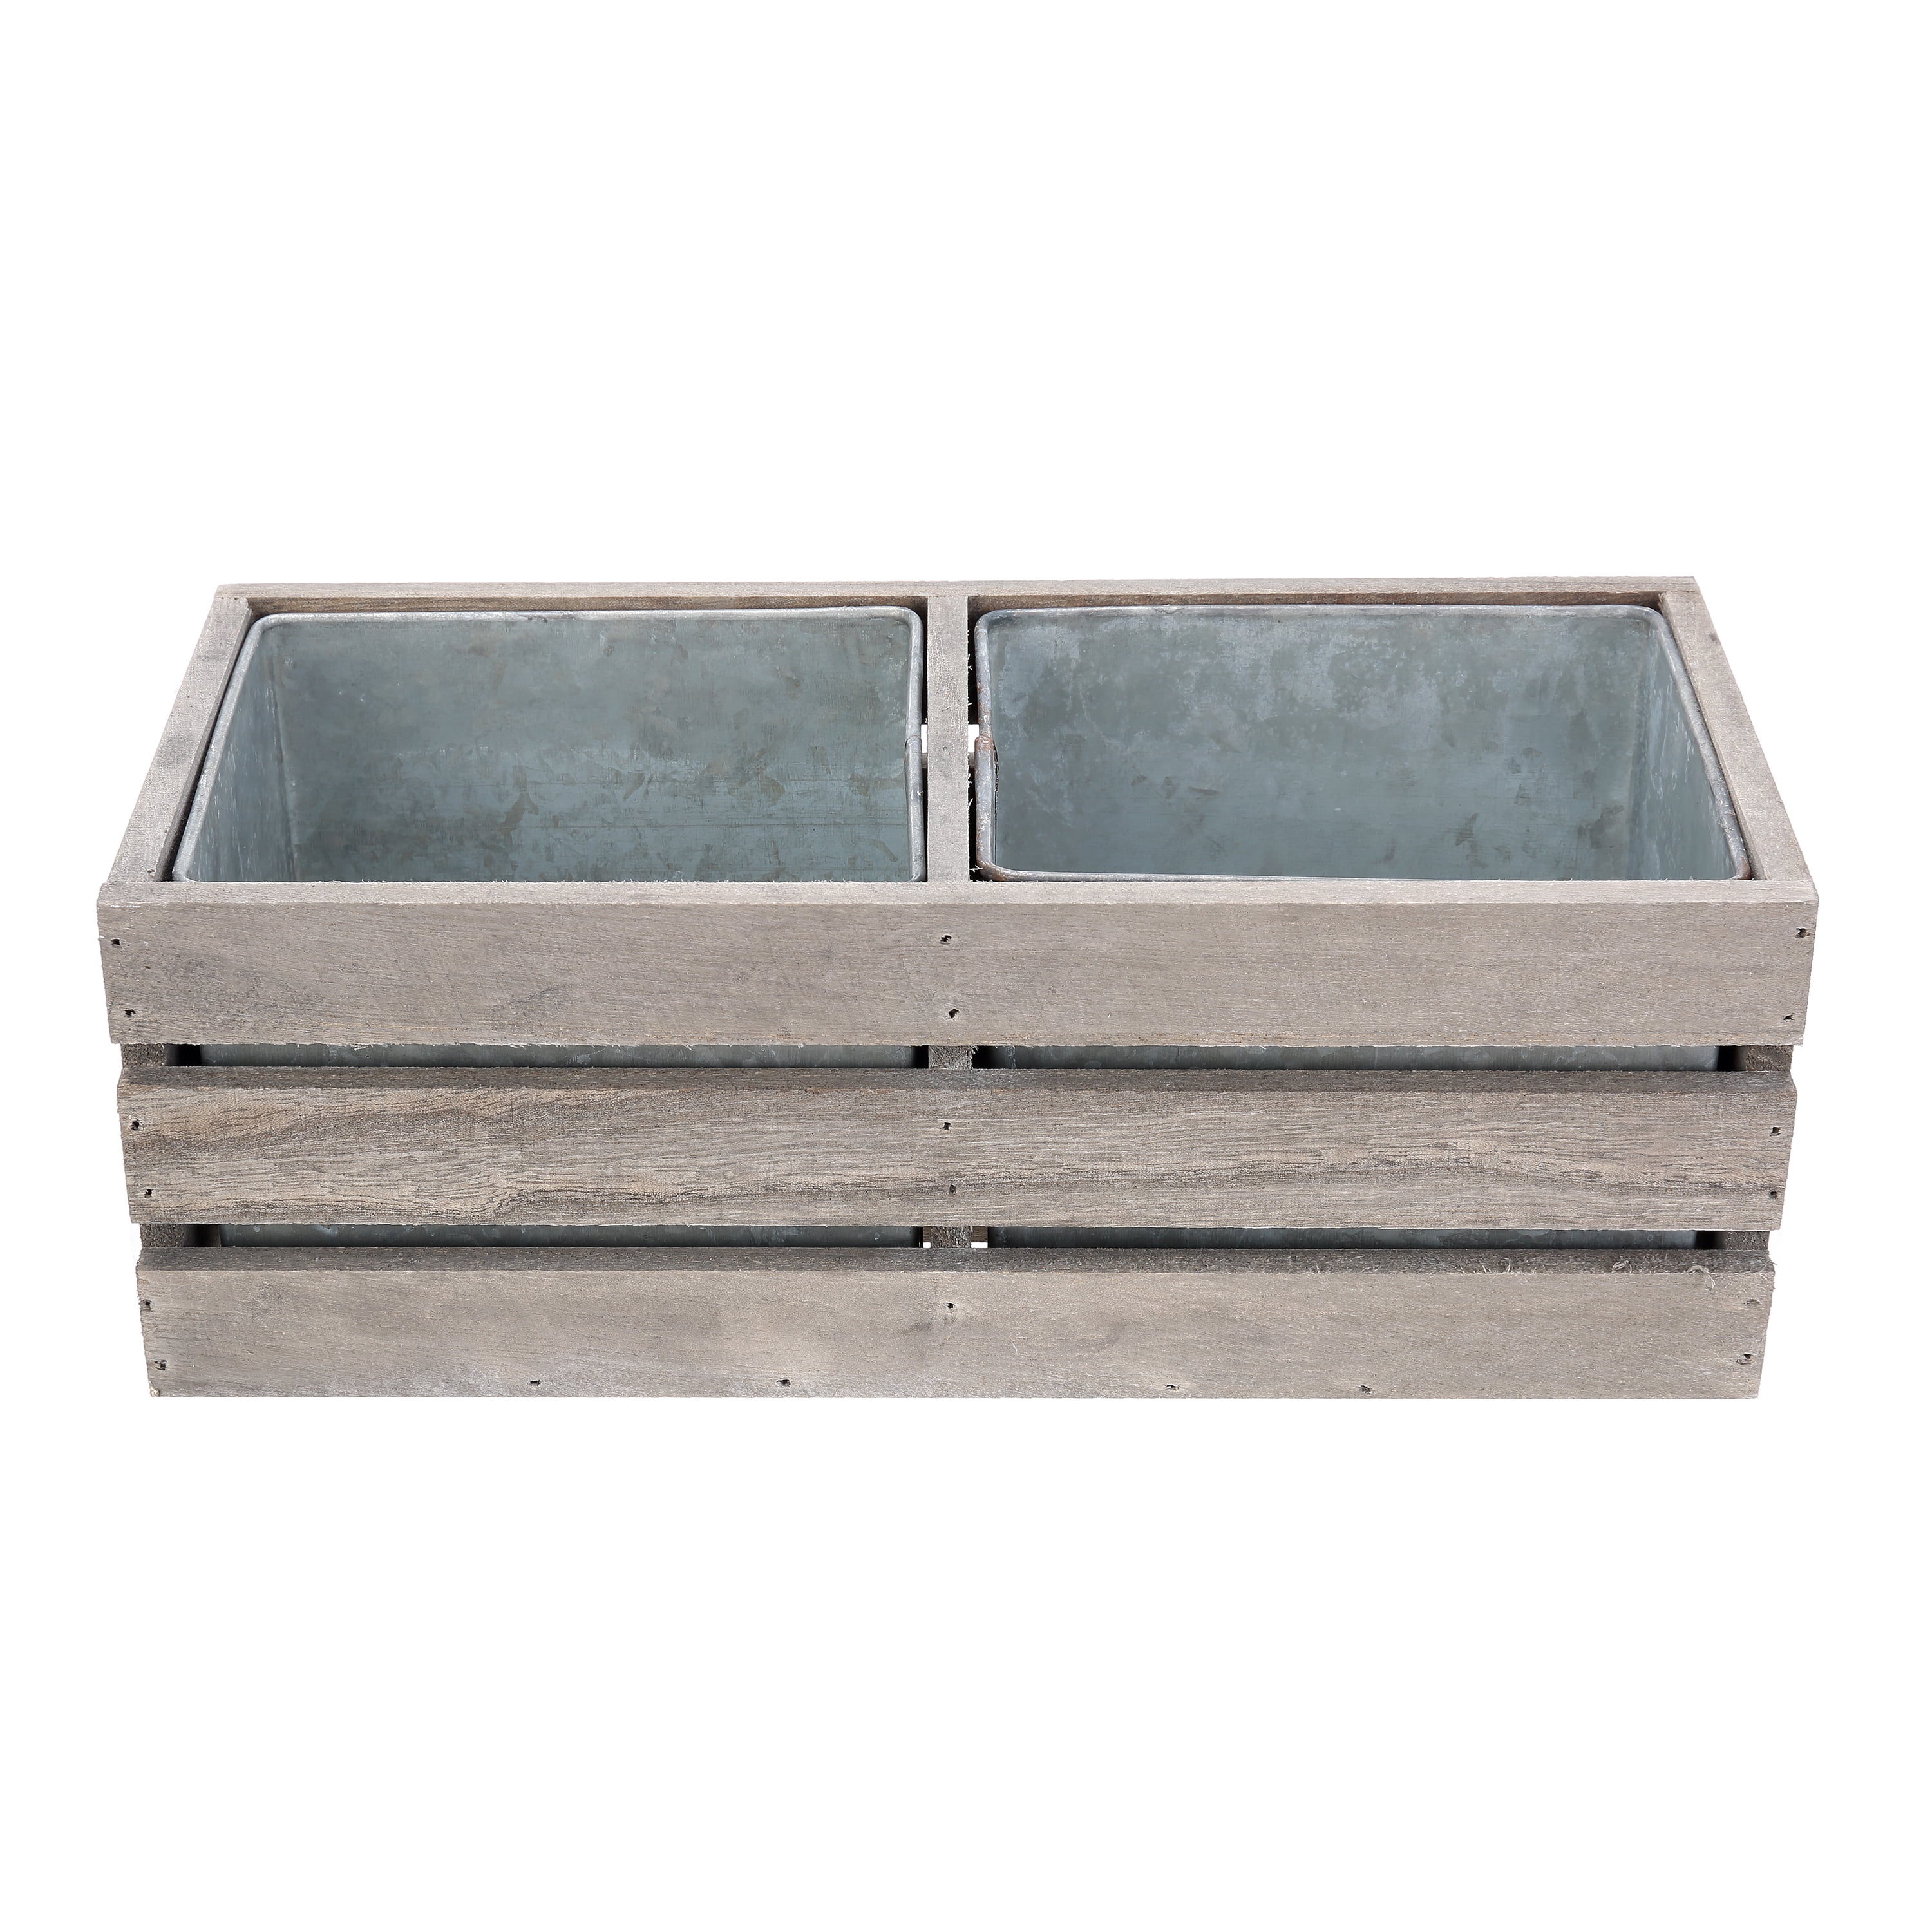 Mainstays Grey Wood Decorative Planter with Removable Metal Inserts